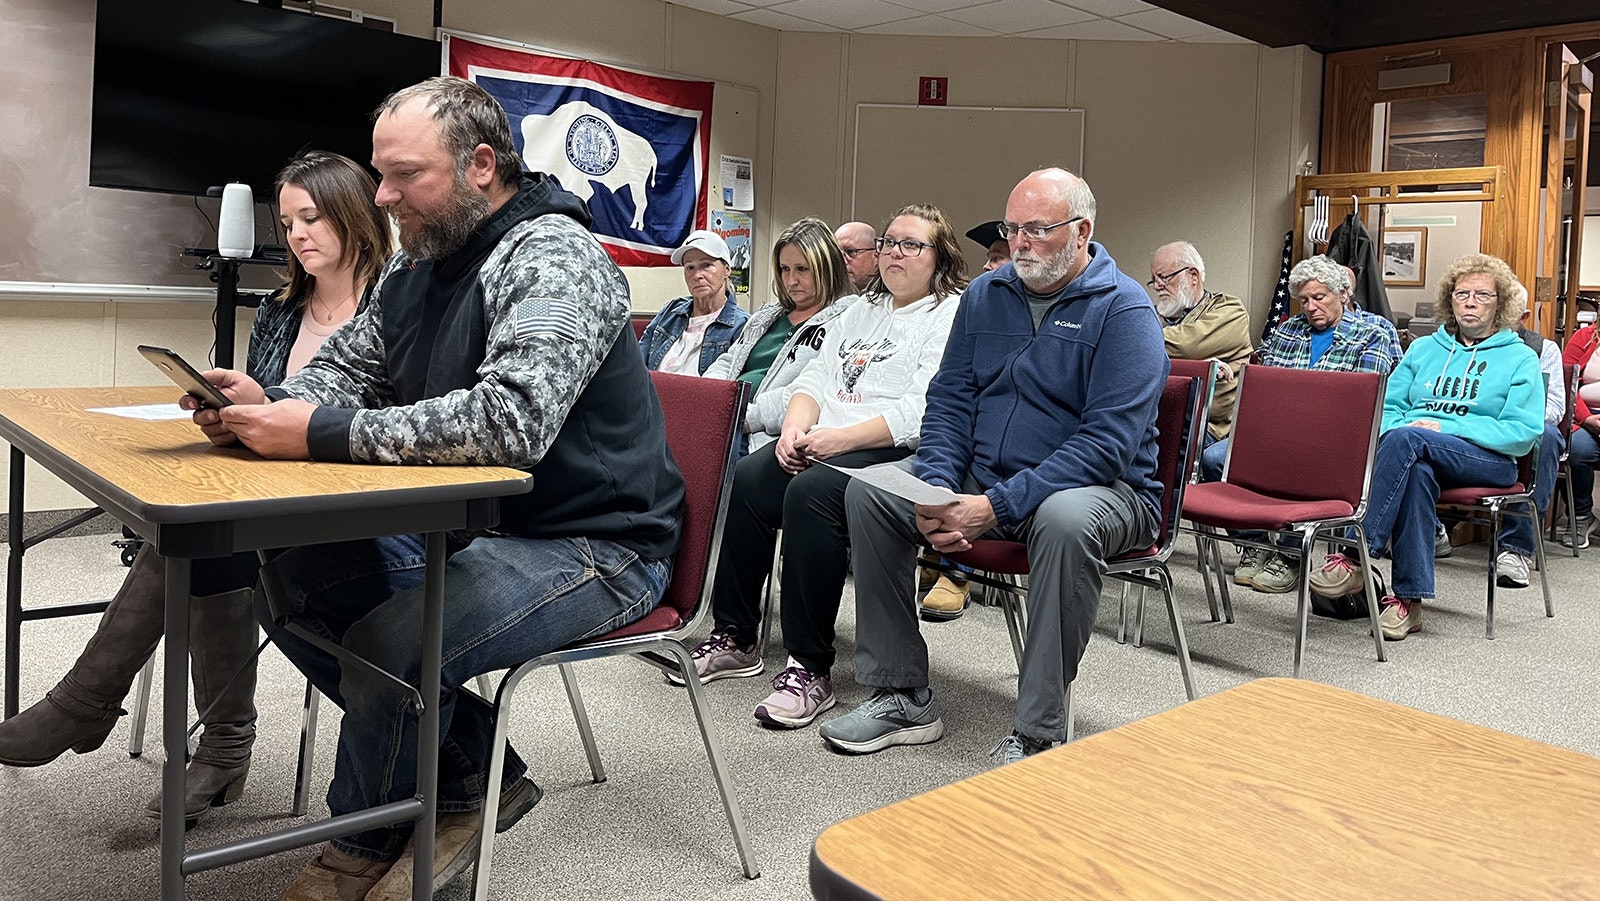 About 30 people were at Tuesday's Thermopolis Town Council meeting to talk about police Sgt. Mike Mascorro, who is on leave after killing a suspect. While some were there to call for his firing, more spoke out in support of the officer.